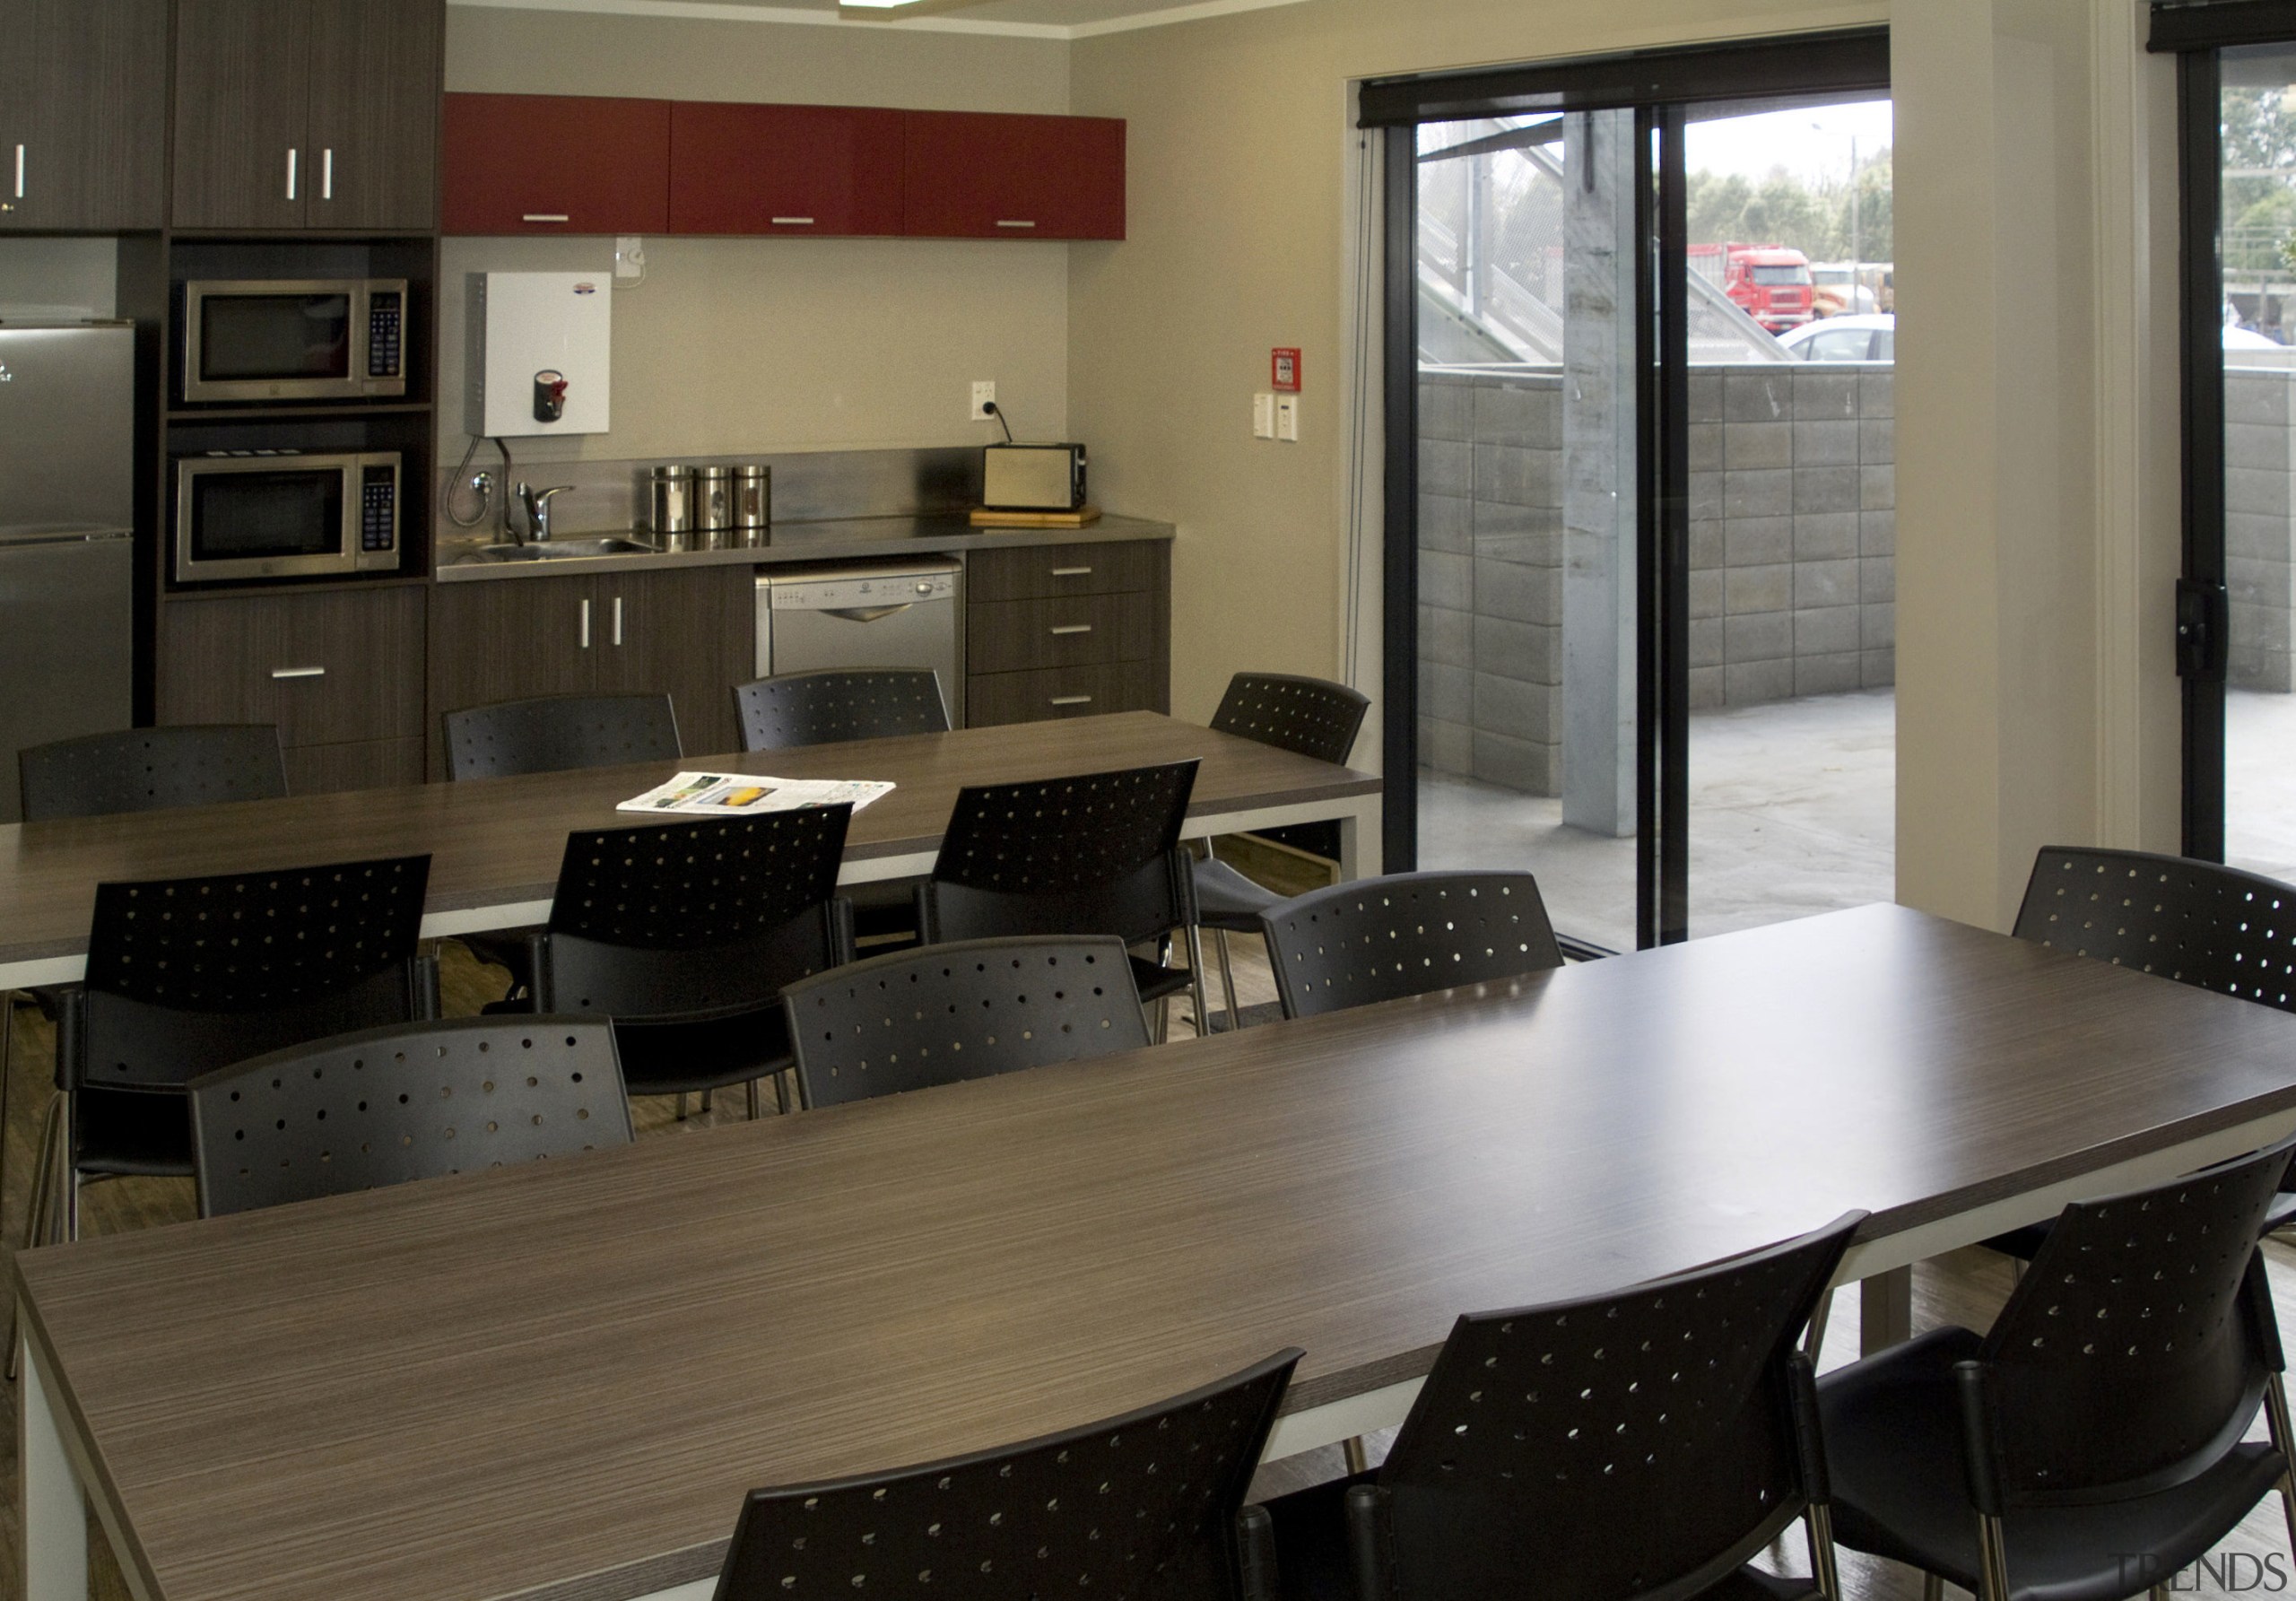 Interior view of the staff kitchen lunchroom within furniture, interior design, office, table, black, brown